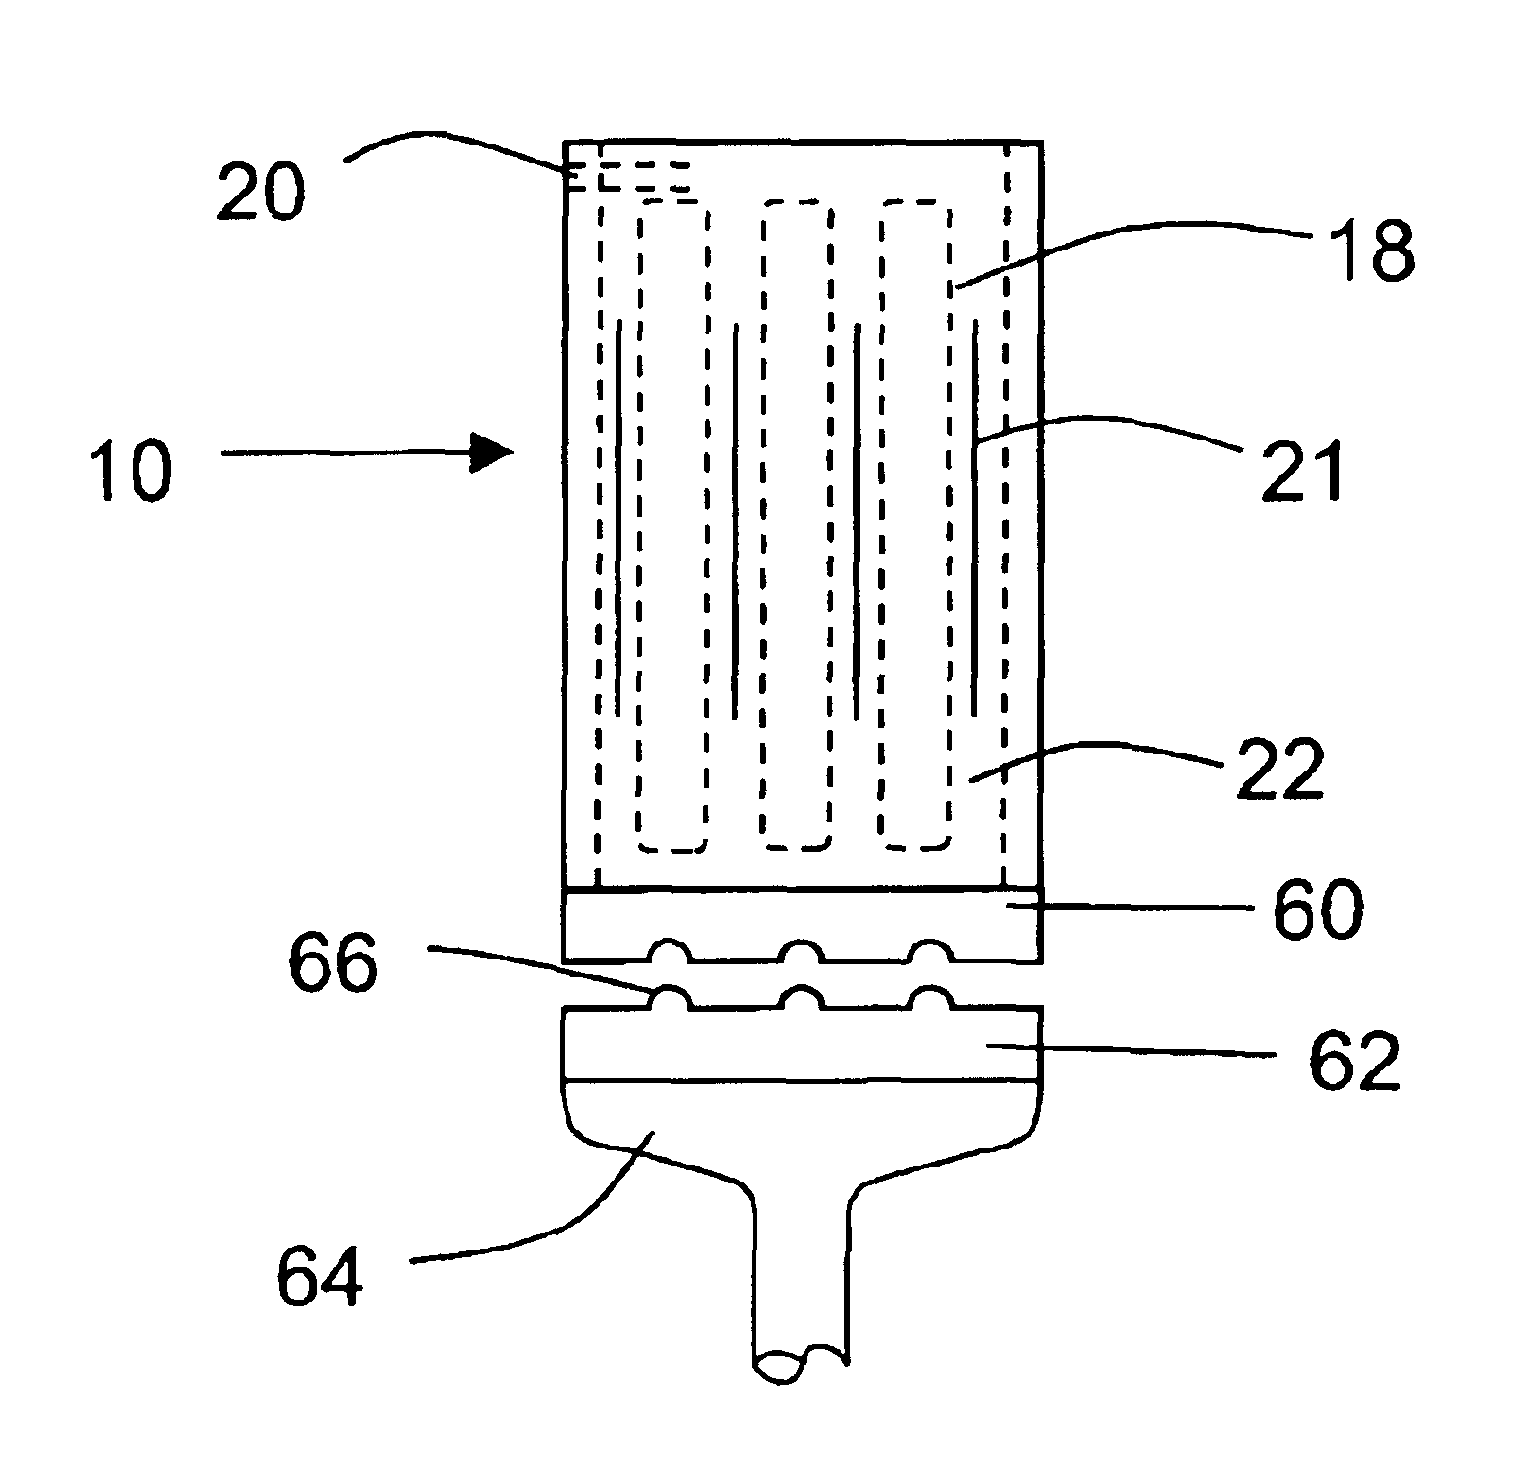 Urinary incontinence control device and method of use